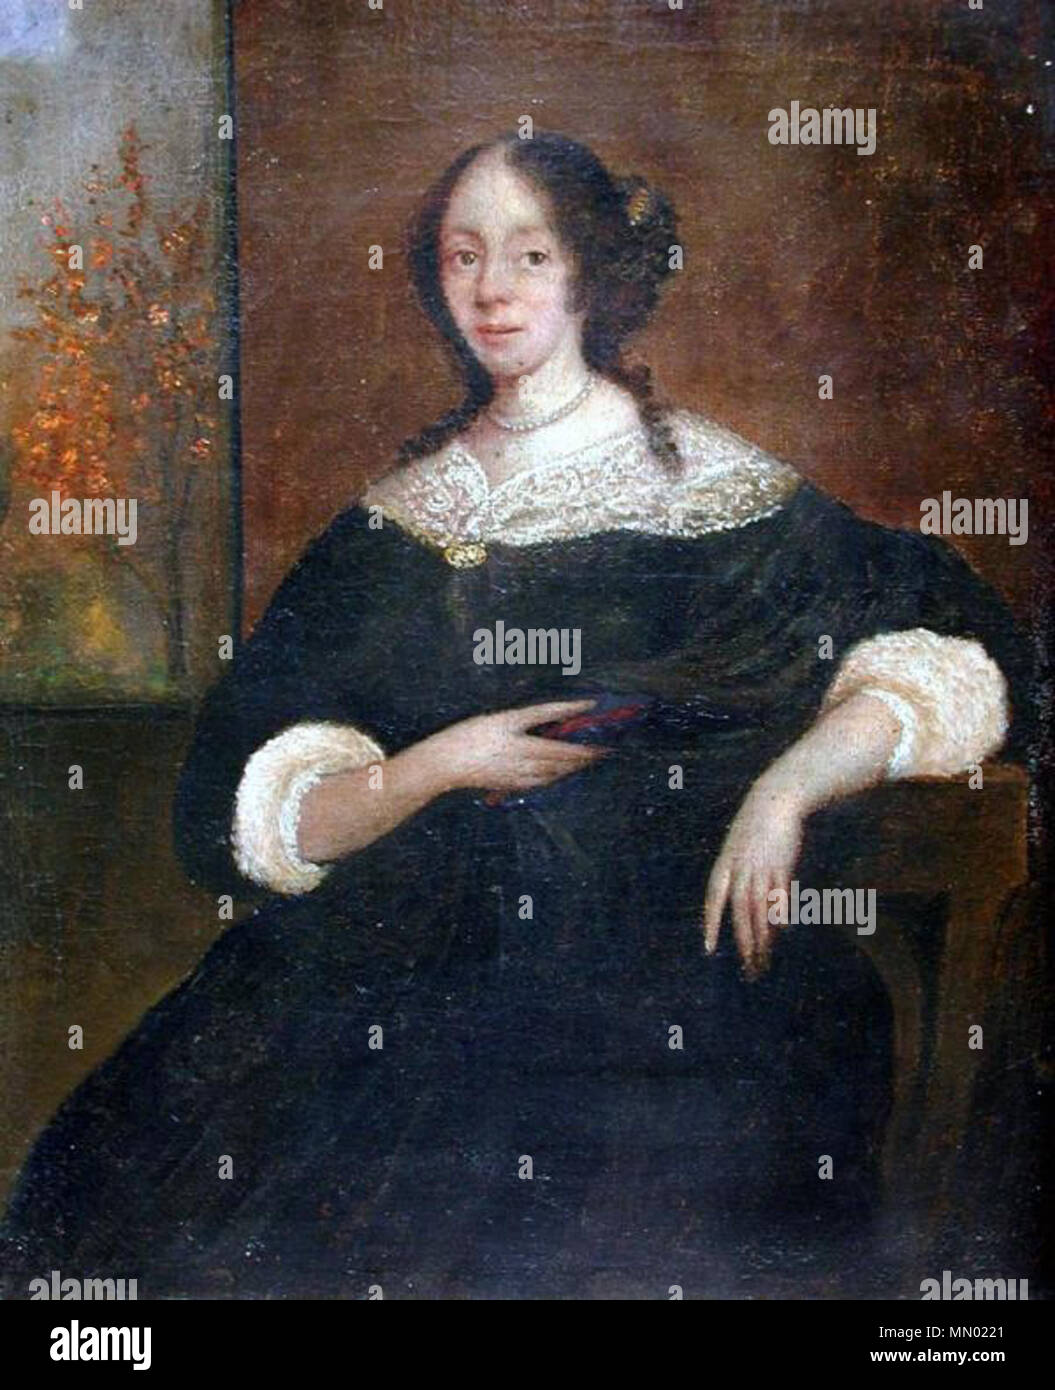 .  The image is of a young woman seated in a chair. Her chestnut hair is curled, gathered in a cluster at the back of her neck; tendrils fall on both shoulders. At her neck is a pearl necklace. She wears a dress that appears to be black, with a broad lace collar gathered at the front of the bodice by an ornament. The white lace sleeves of her undergarment show beneath the dress, and are gathered below the elbow. A dark scarf hangs over her left arm and is gathered behind her right hand, which also holds a small book. The upper part of her full skirt is visible, as is the wooden open back of th Stock Photo